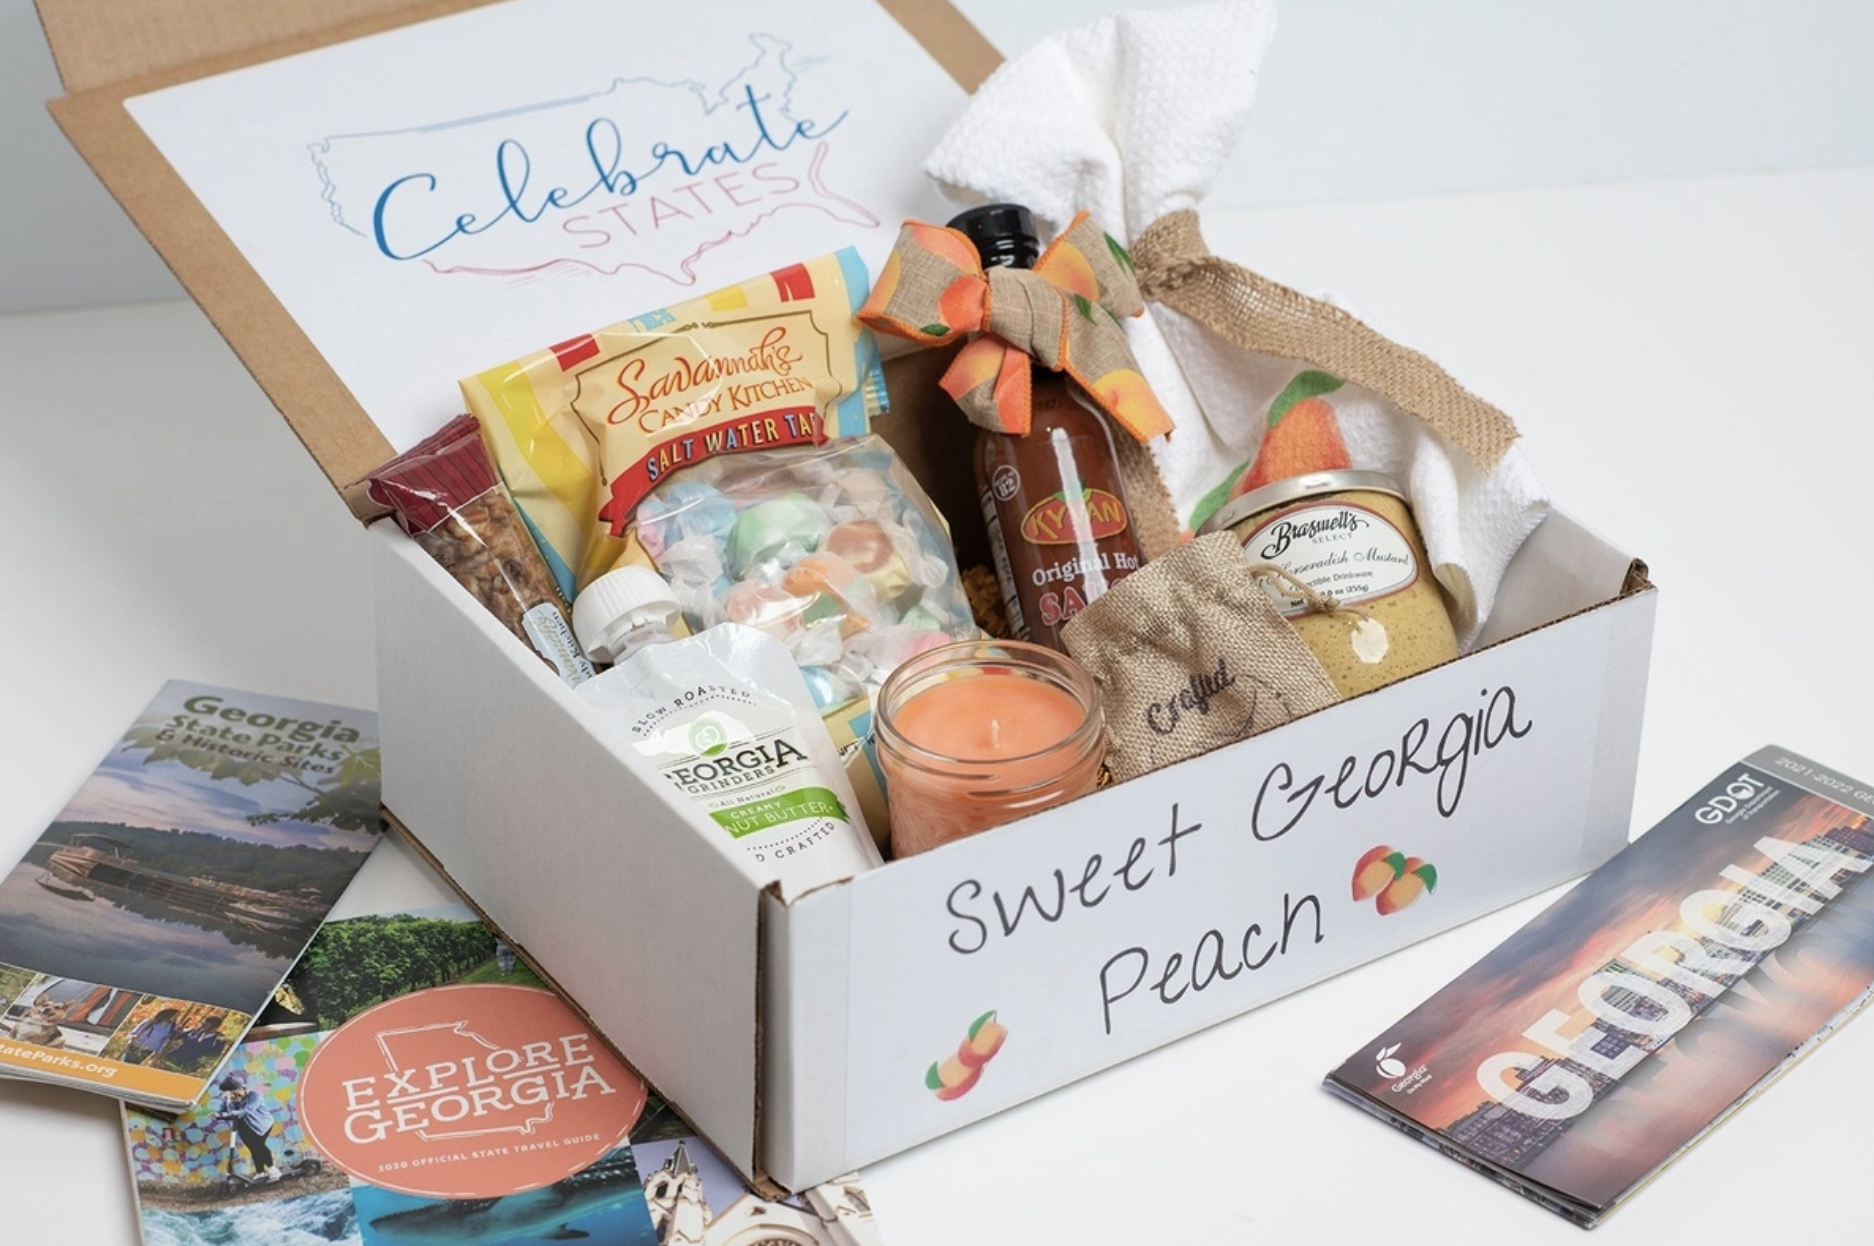 sweet georgia peach box filled with a candle, salt water taffy, peanut butter, and more goodies from georgia